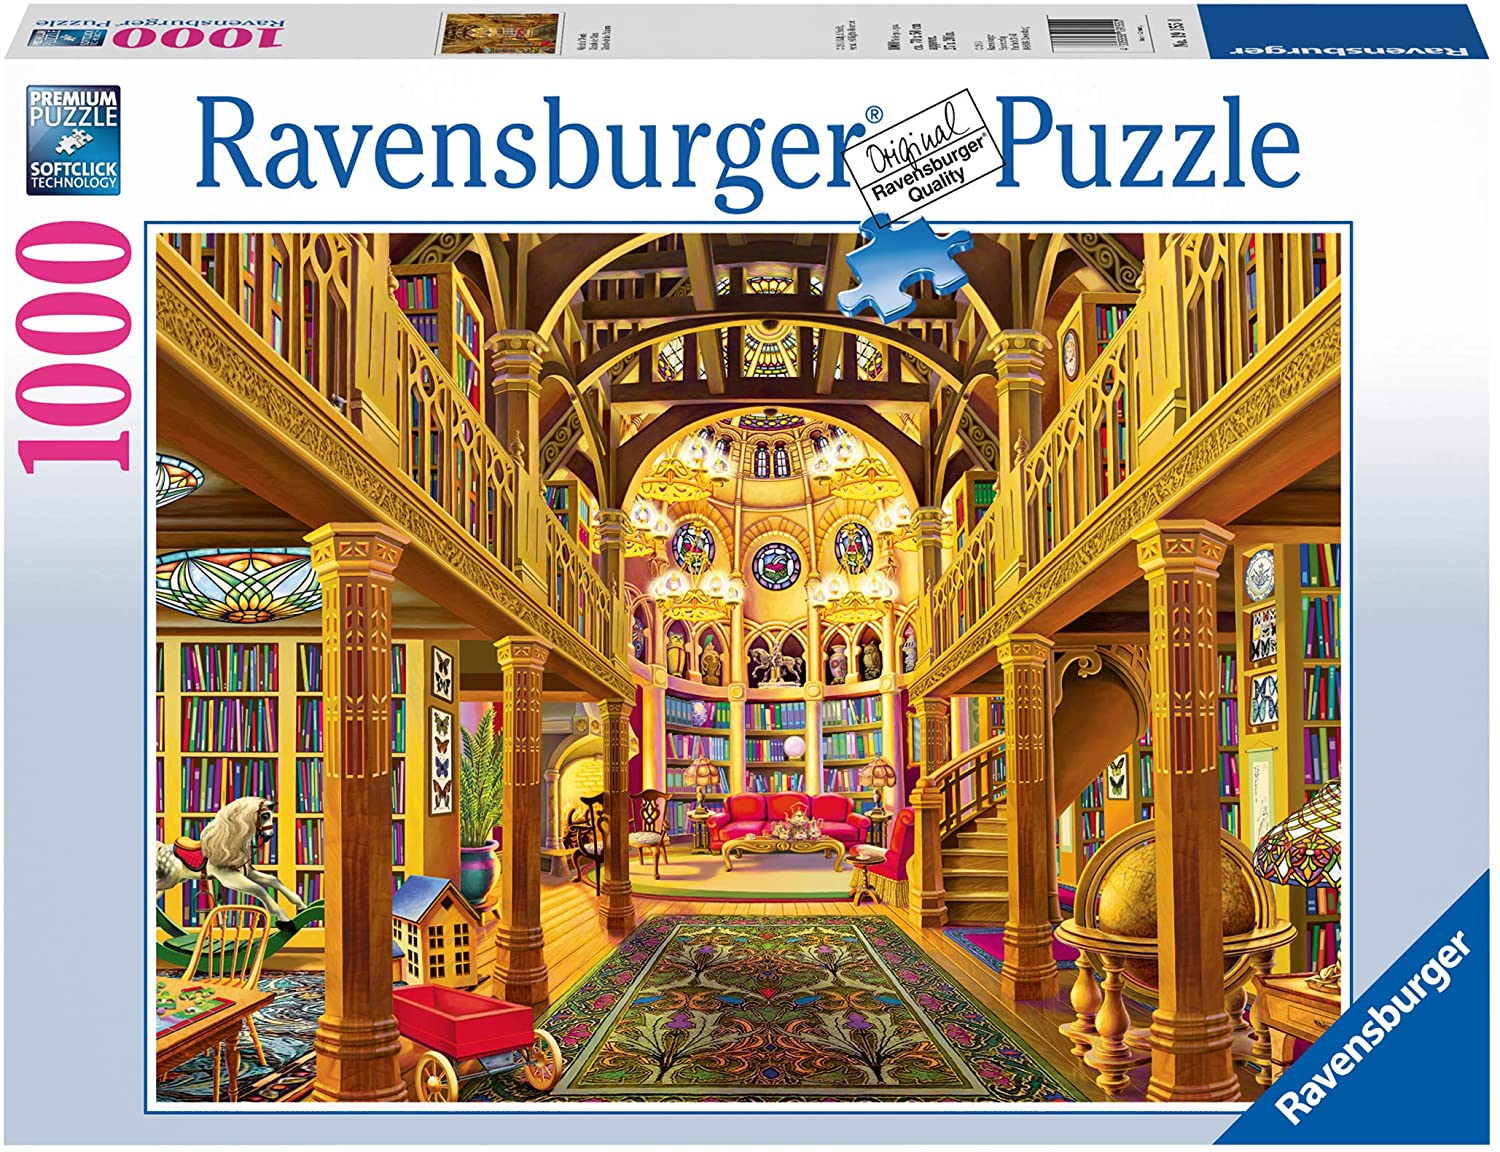 Ravensburger World of Words 1000 Piece Puzzle